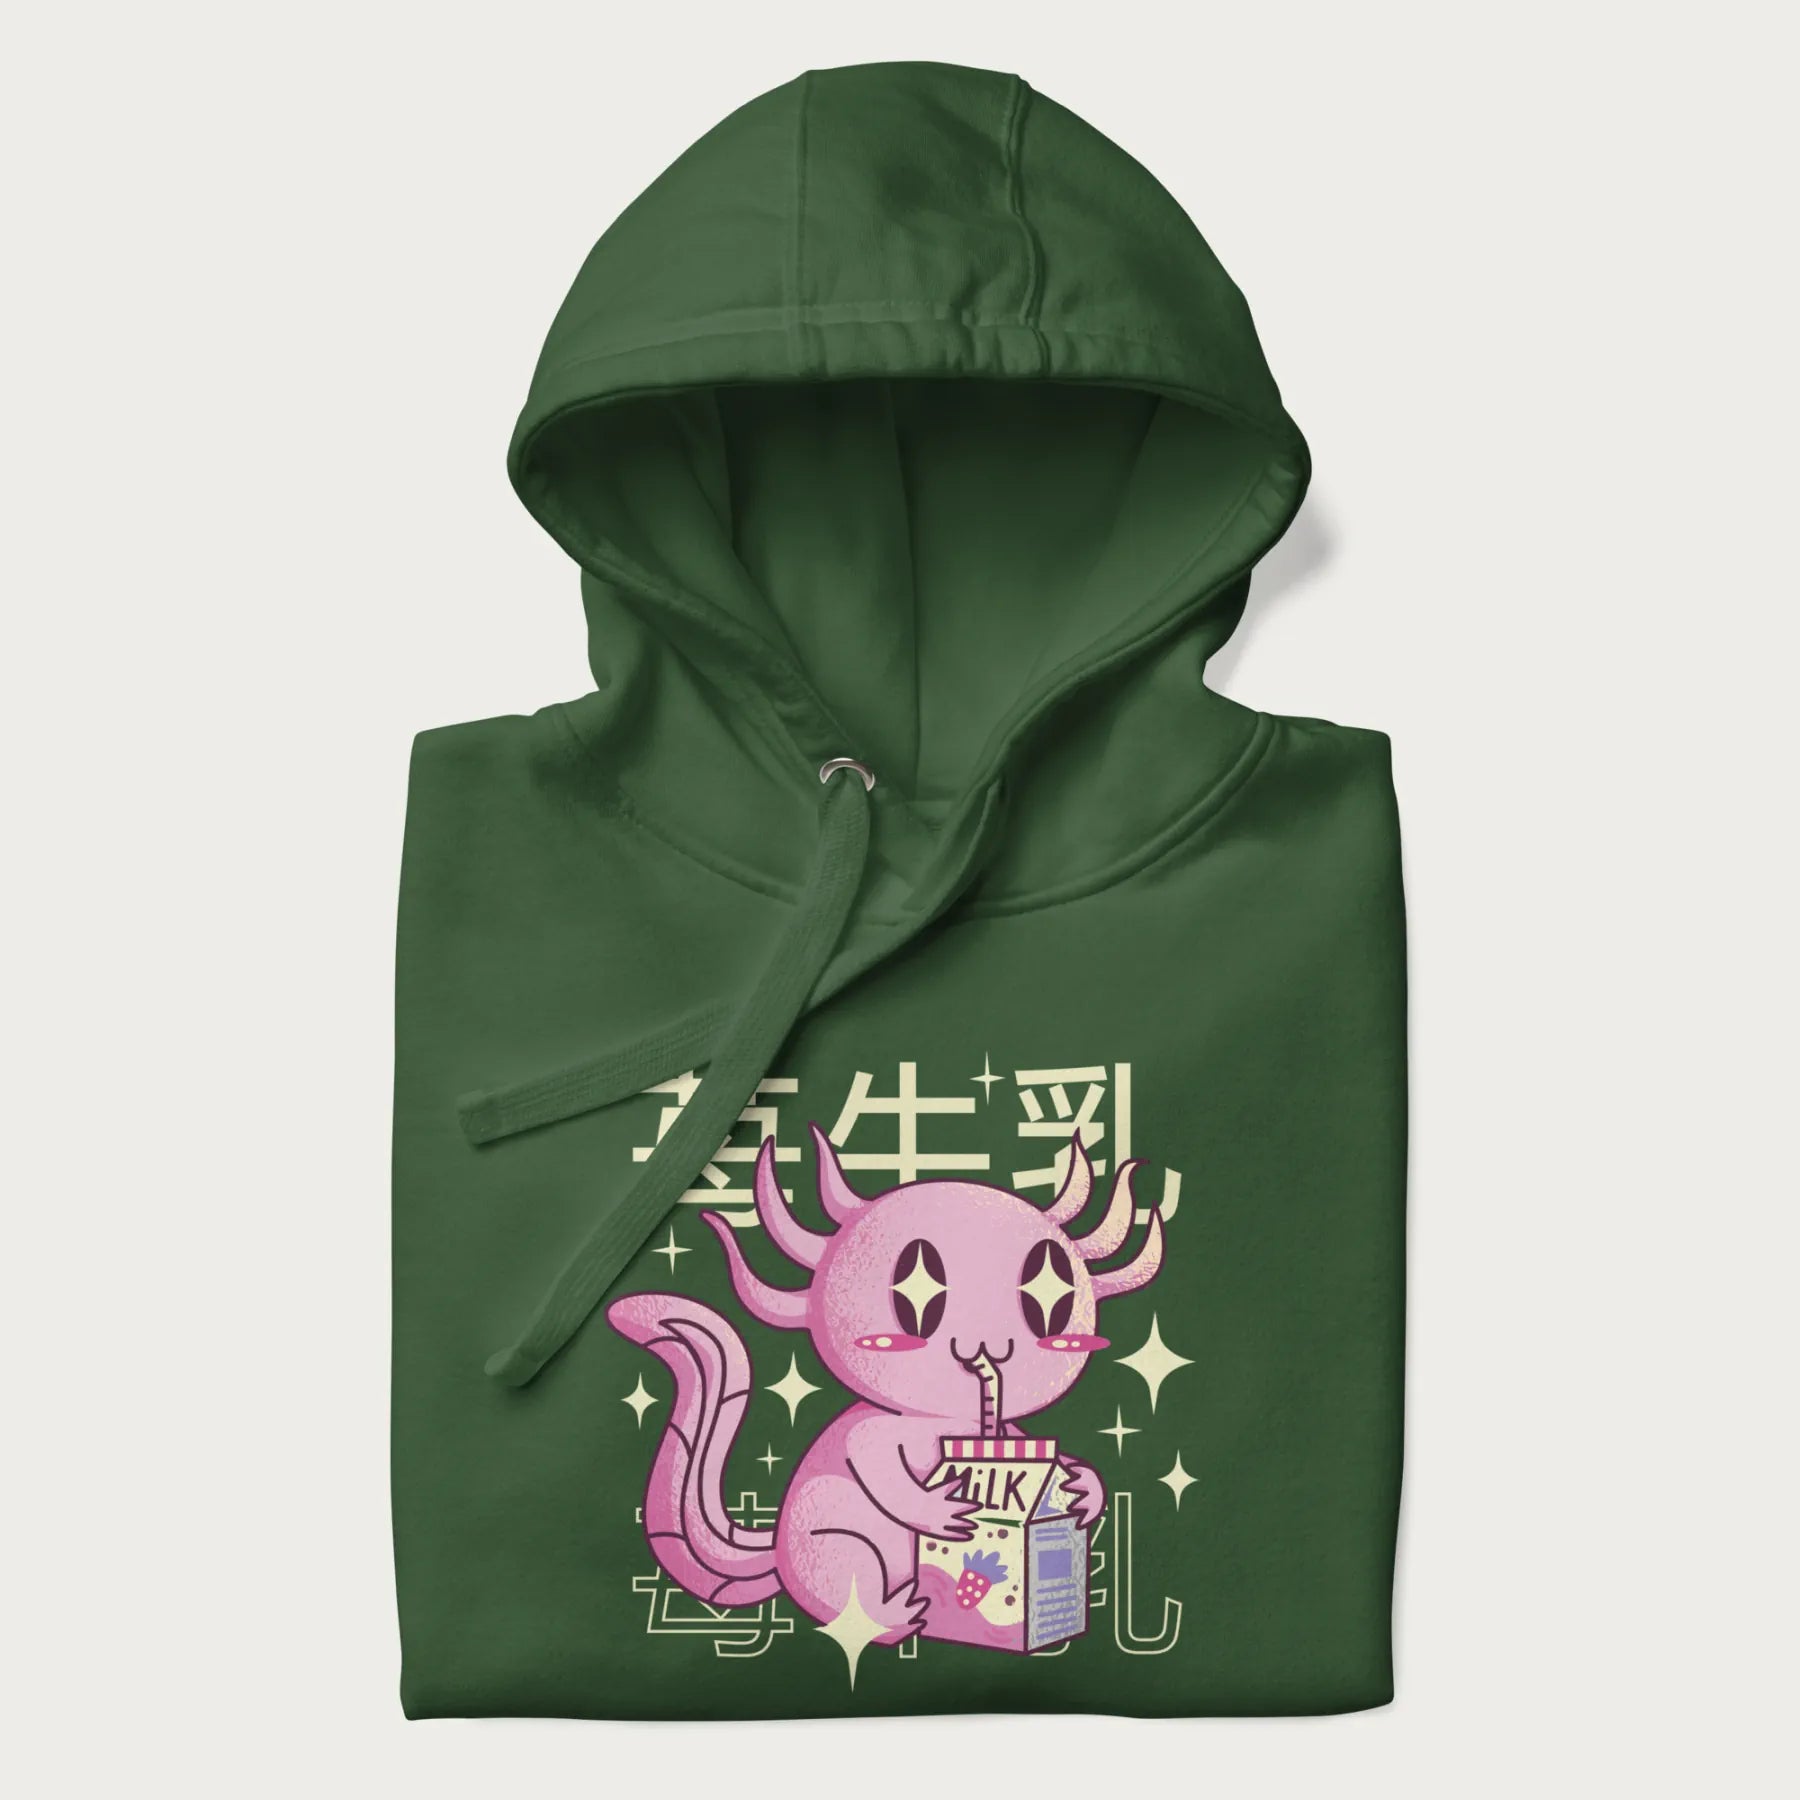 Folded forest green hoodie with Japanese graphic of a cute pink axolotl sipping strawberry milk from a carton, with Japanese text '苺牛乳' (Strawberry Milk).